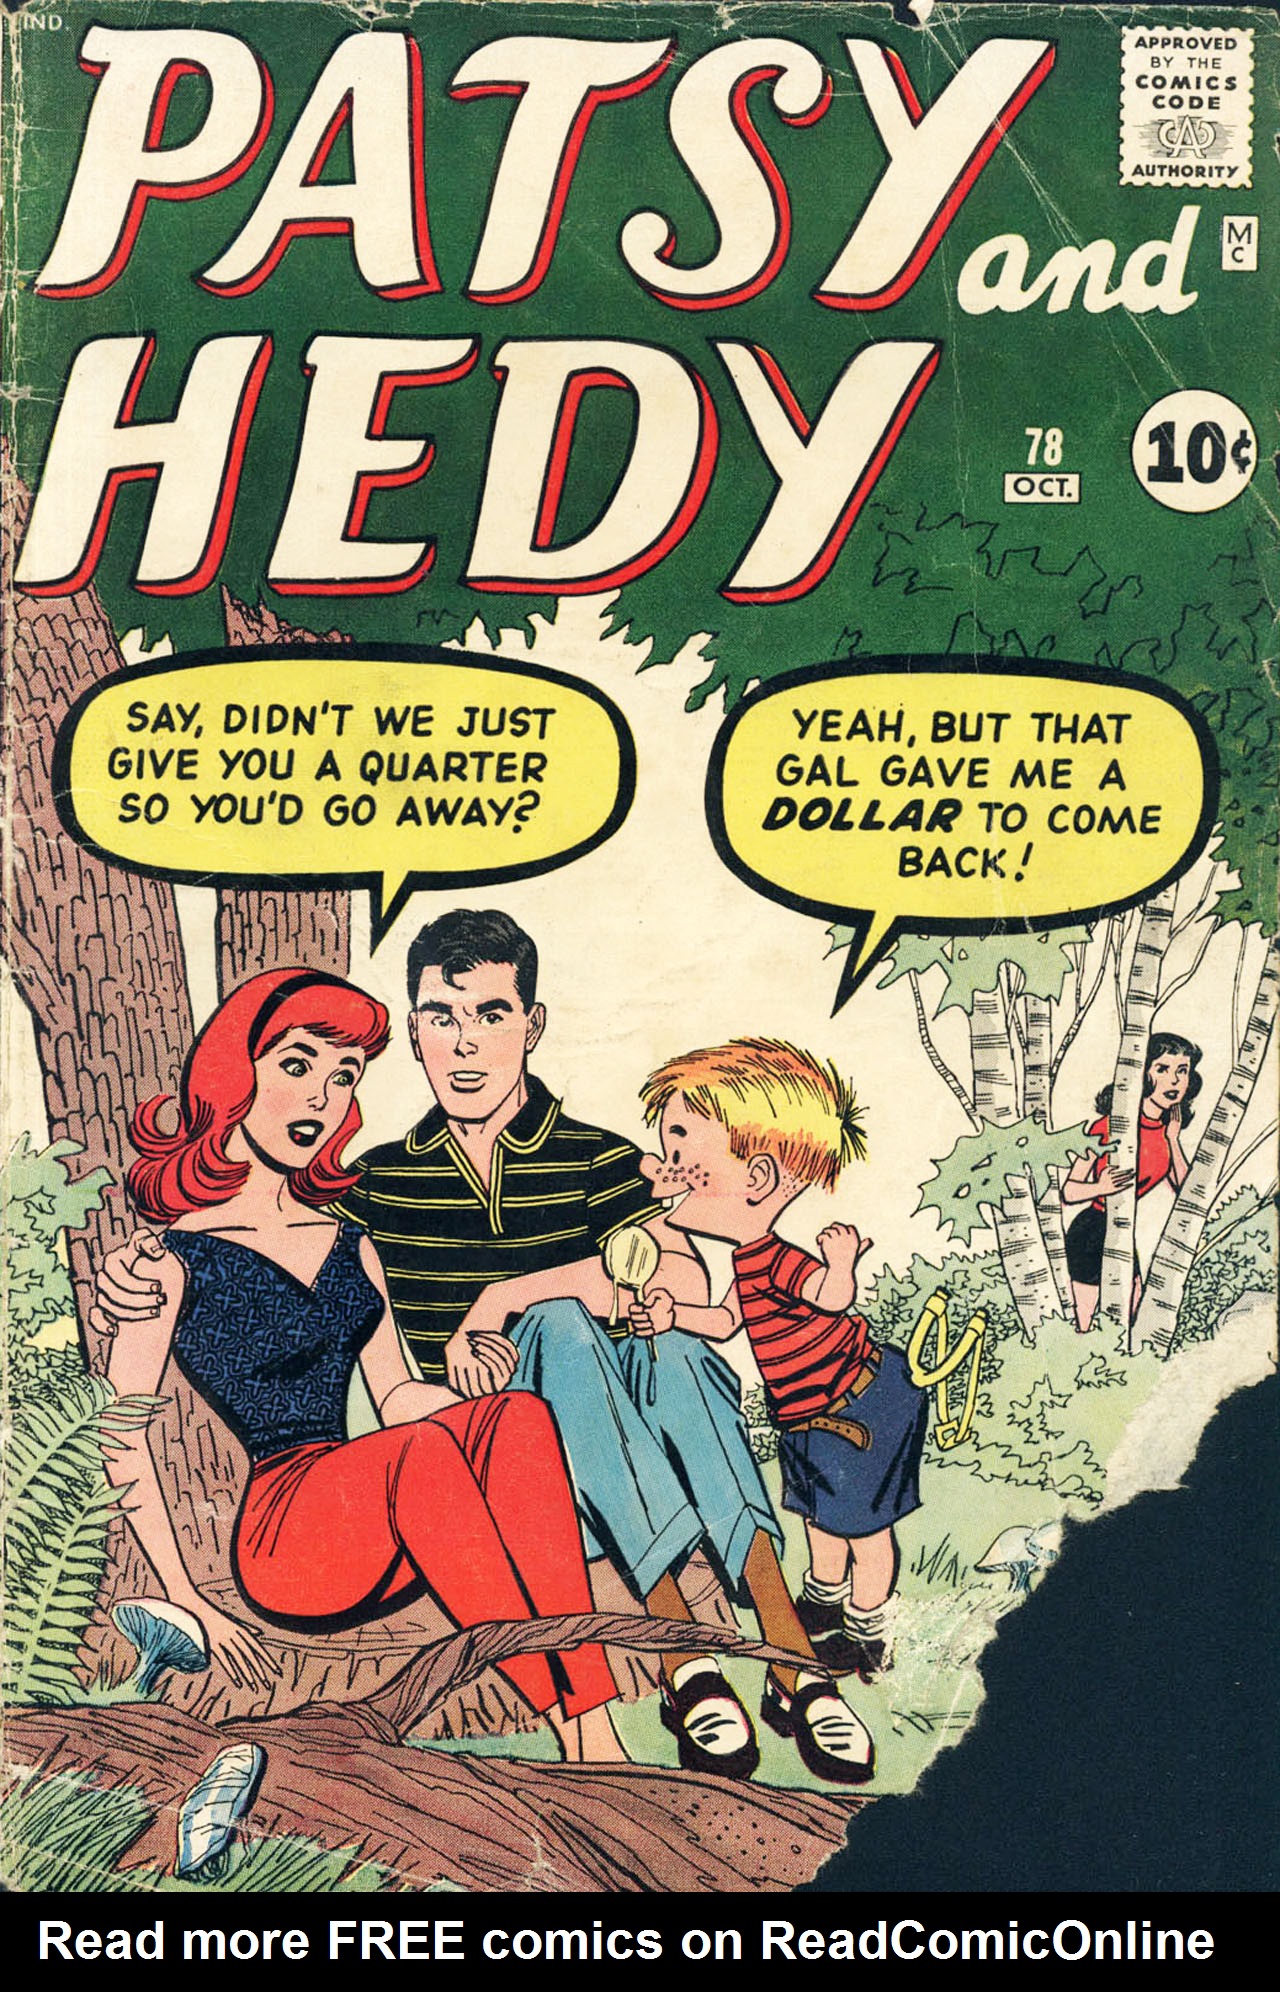 Read online Patsy and Hedy comic -  Issue #78 - 1